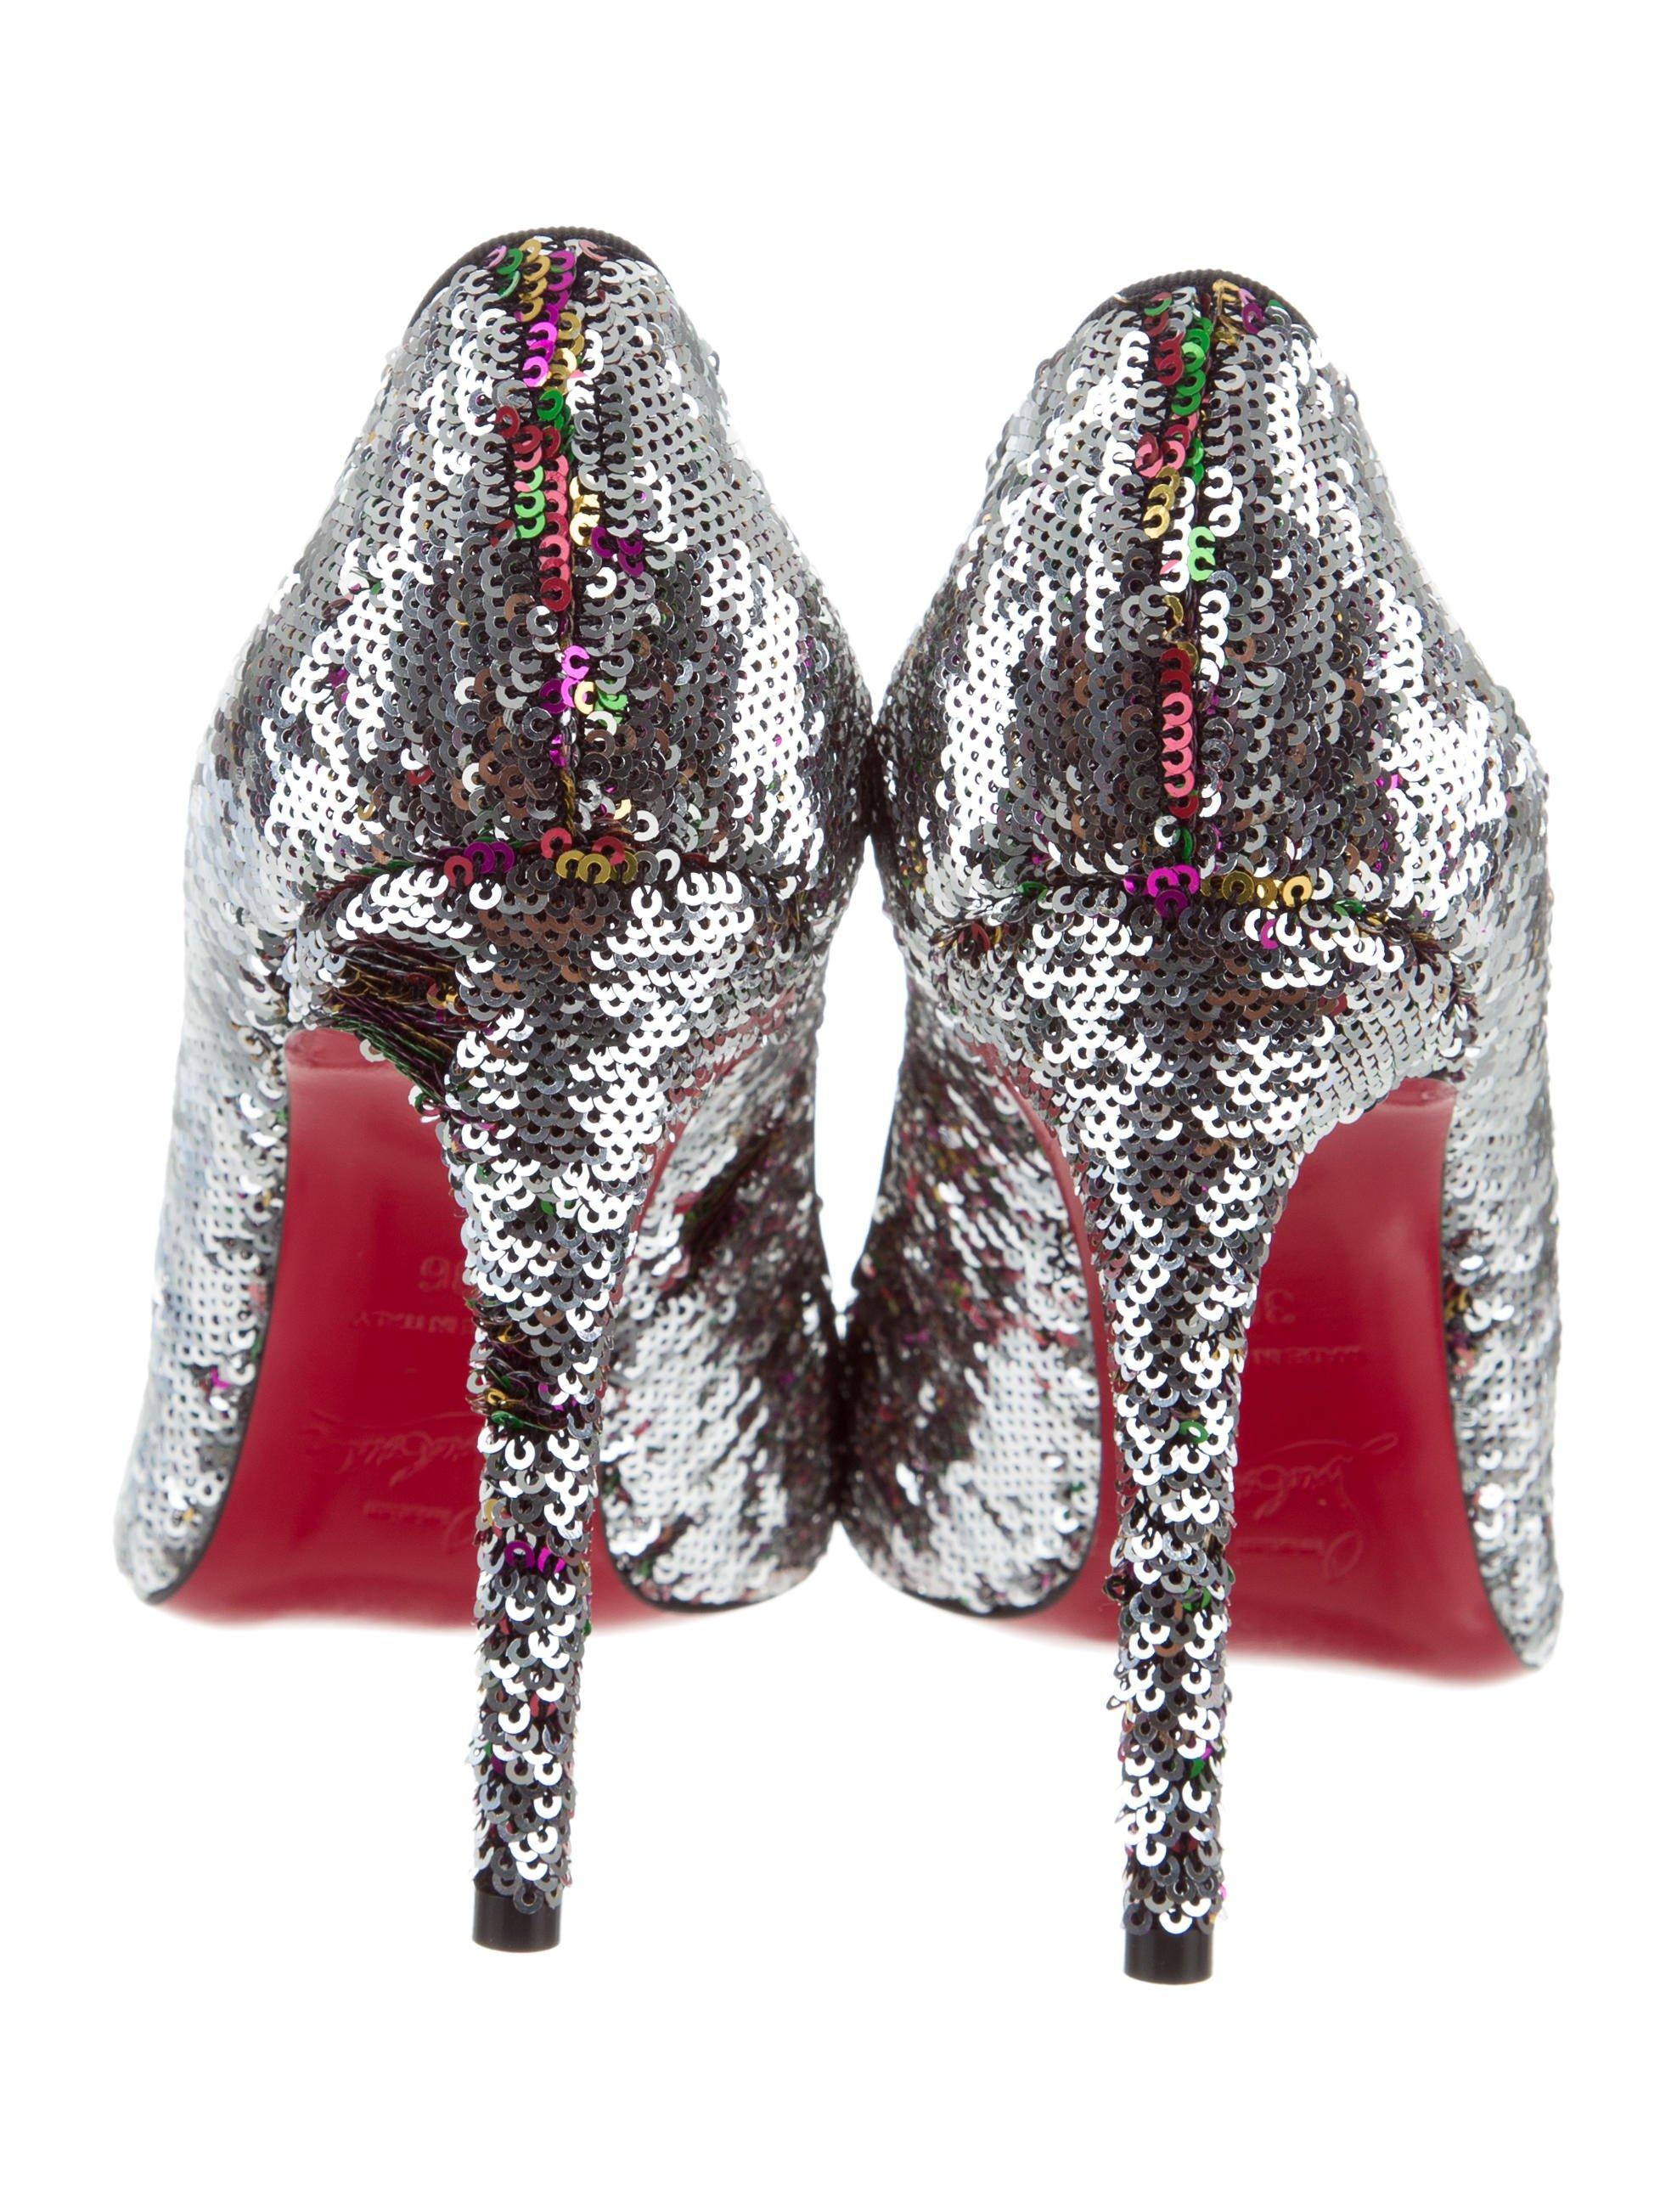 Women's Christian Louboutin NEW Multi Color Woven and Sequin Evening Heels Pumps 